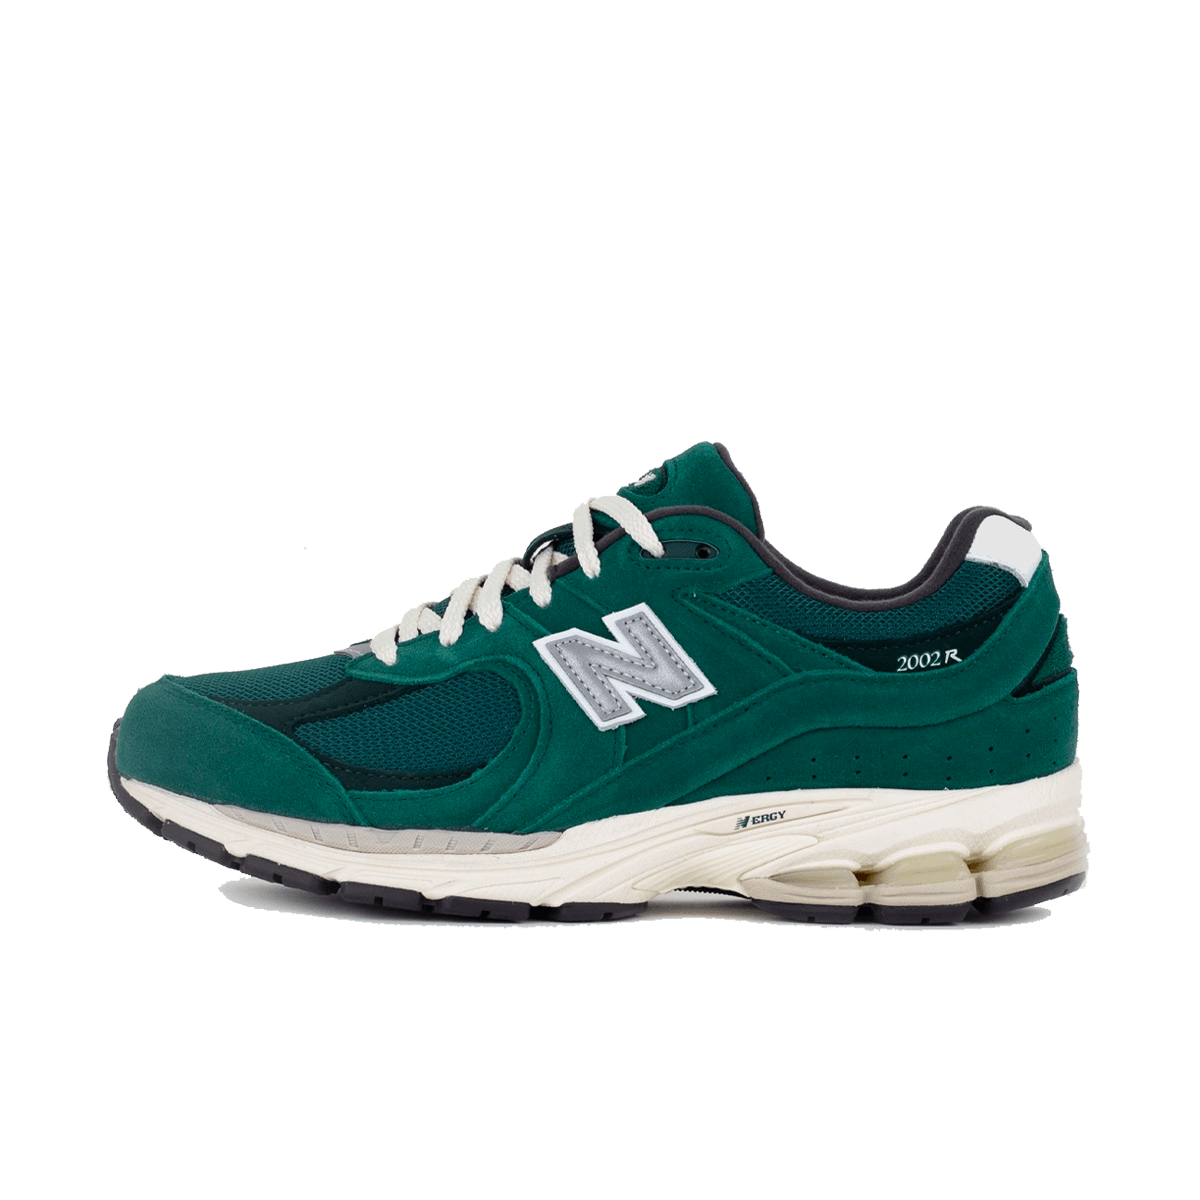 New Balance 2002R 'Forest Green' - Higher Learning Pack M2002RHB